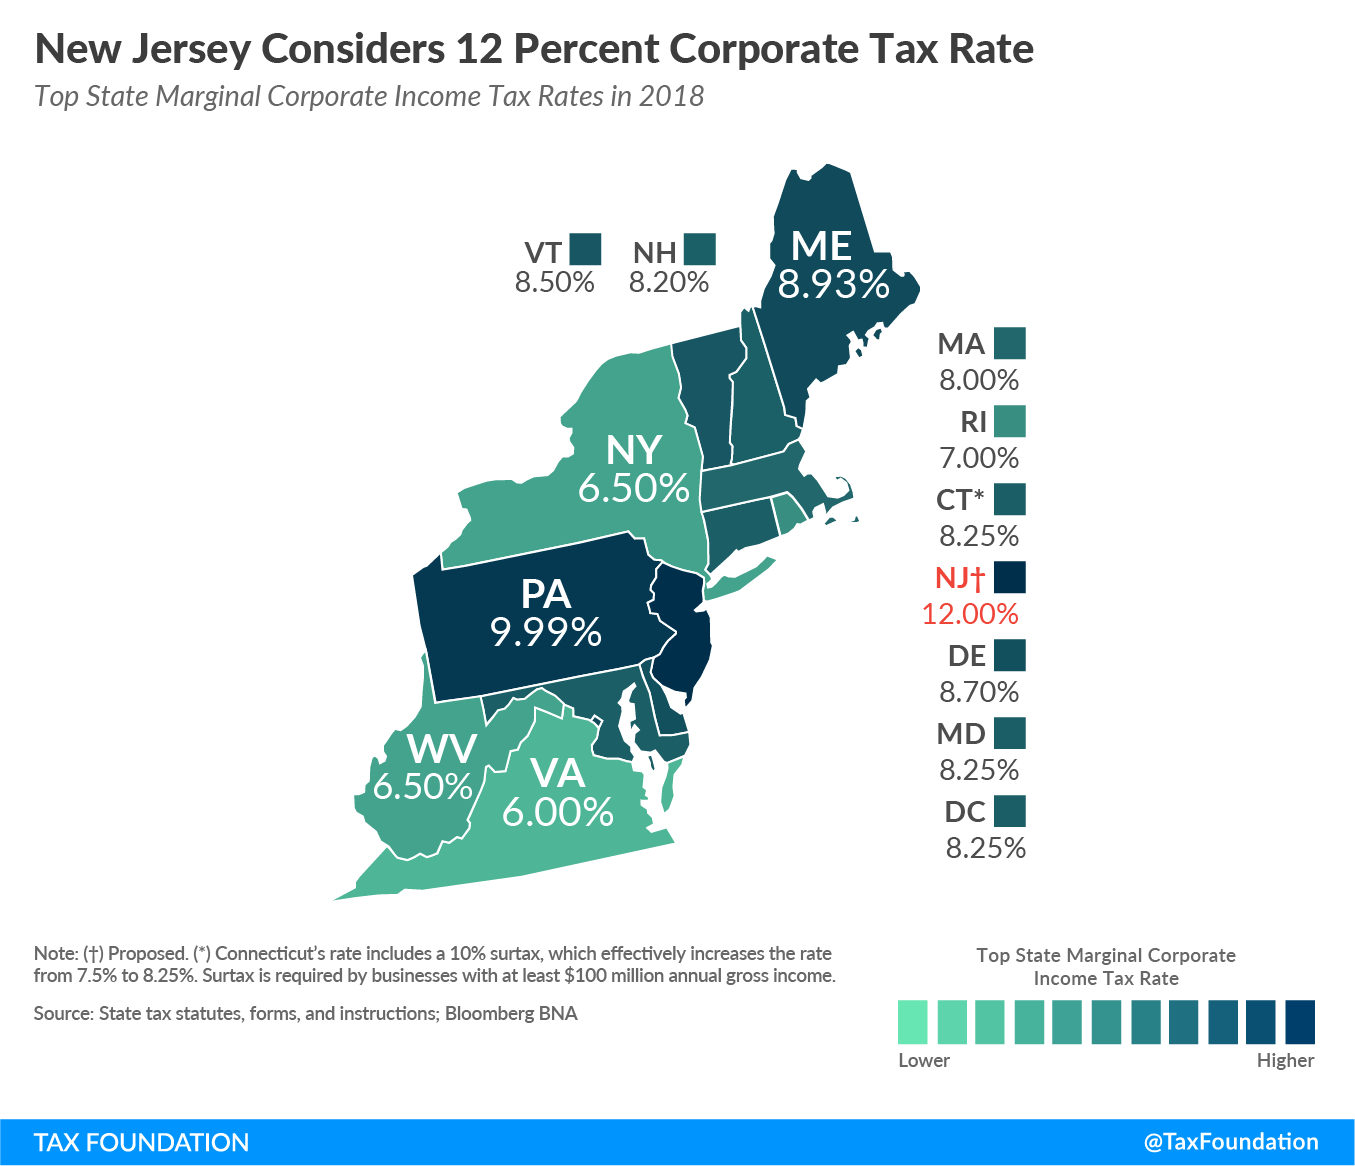 New Jersey Considers 12 Percent Corporate Tax Rate